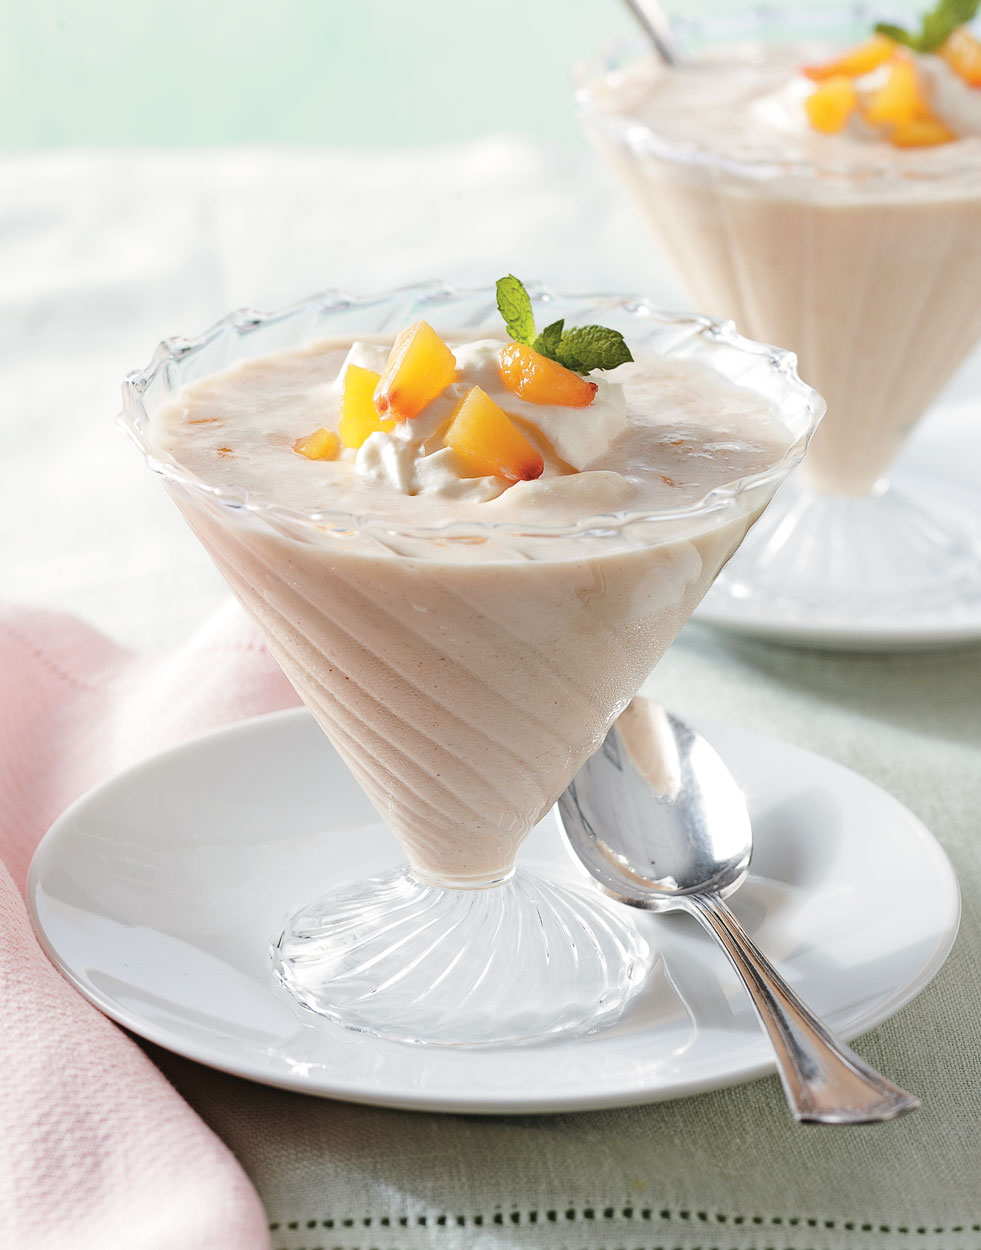 Peach Alexander with White Chocolate Whipped Cream